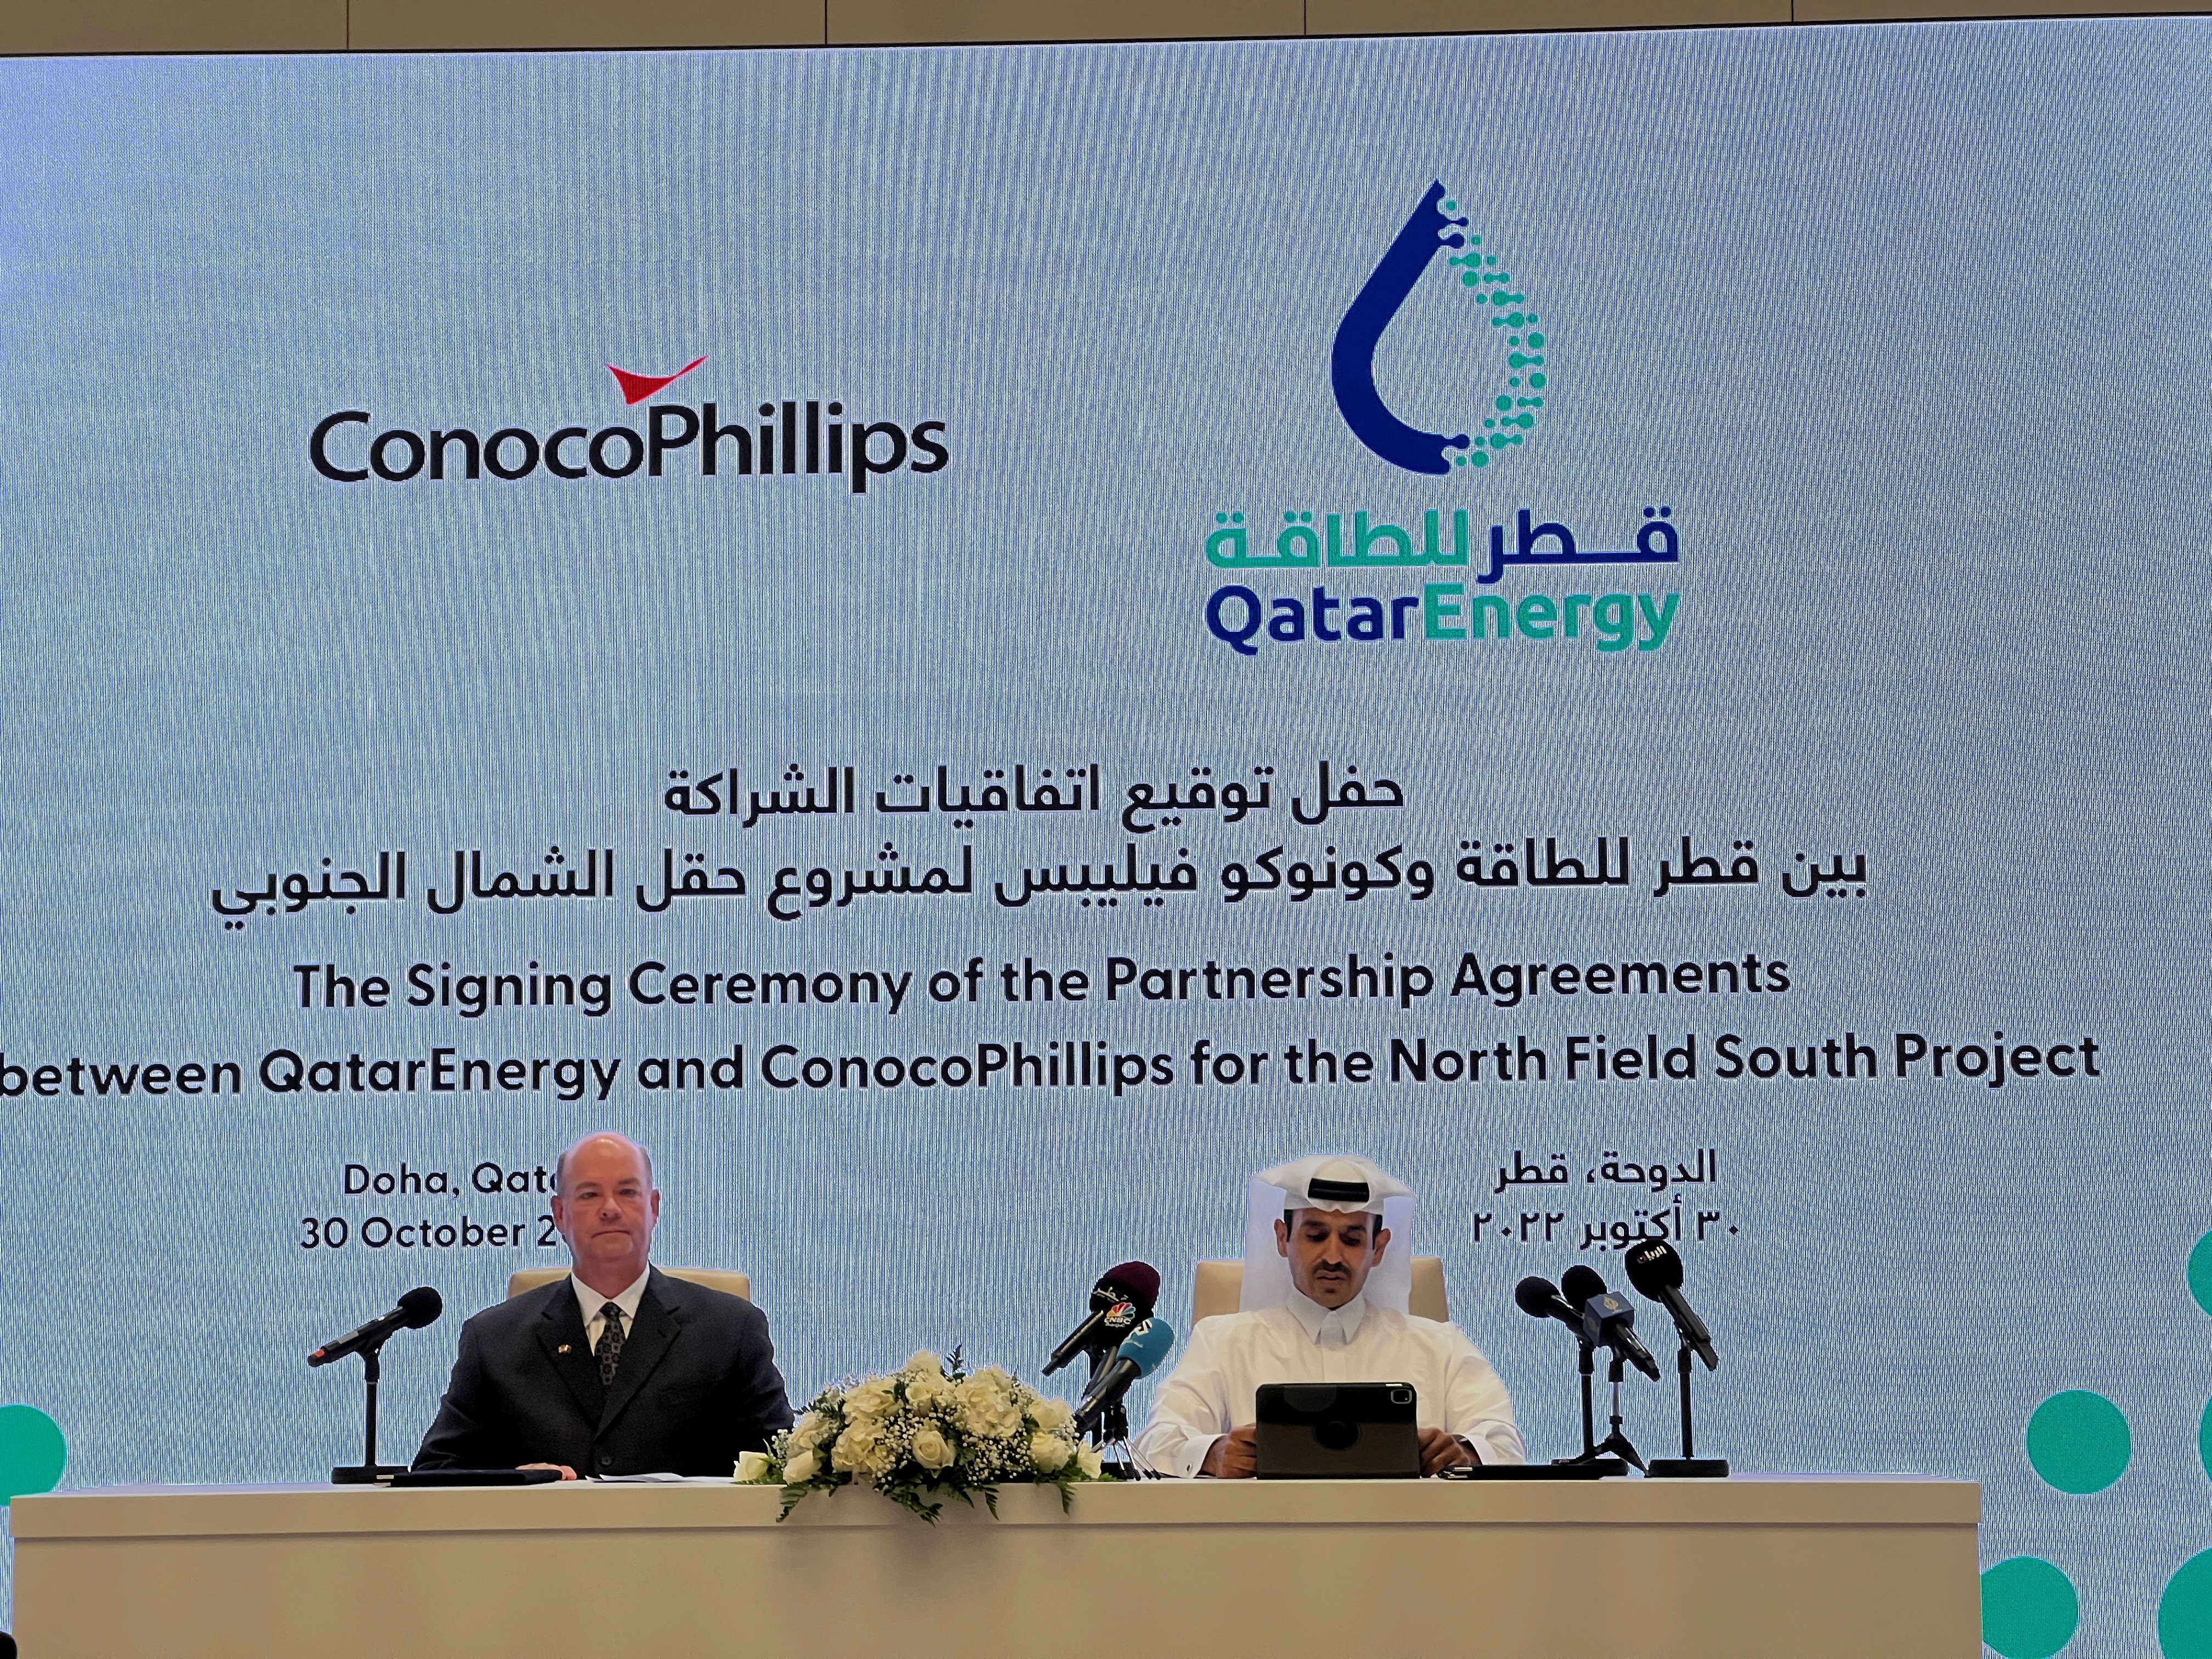 Qatar's Energy Minister and CEO of QatarEnergy Saad al-Kaabi and ConocoPhillips CEO Ryan Lance attend a signing ceremony in Qatar